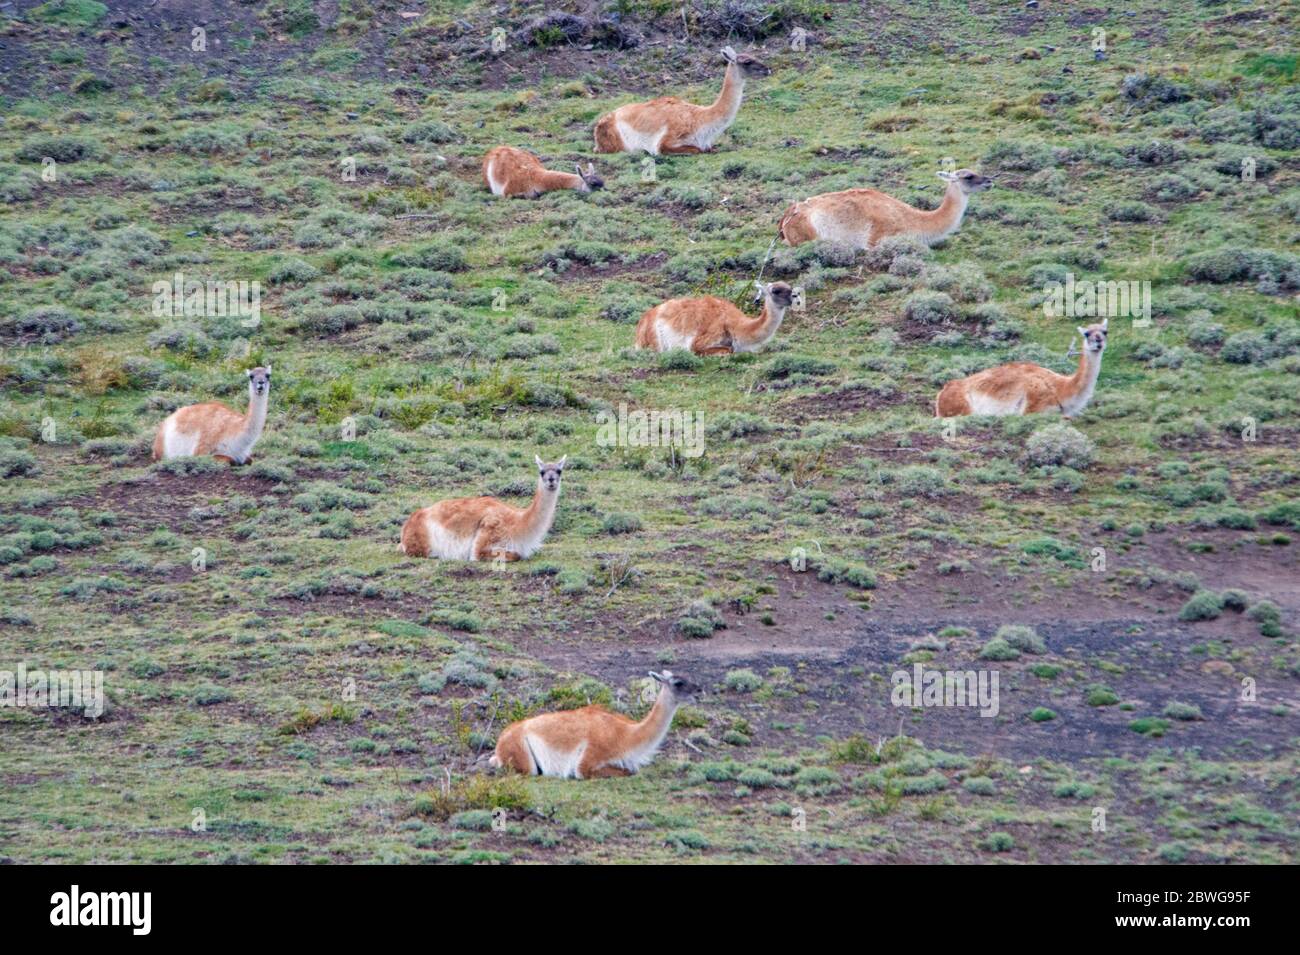 Herd of guanacos (Lama guanicoe) lying on grassy slope, Patagonia, Chile, South America Stock Photo